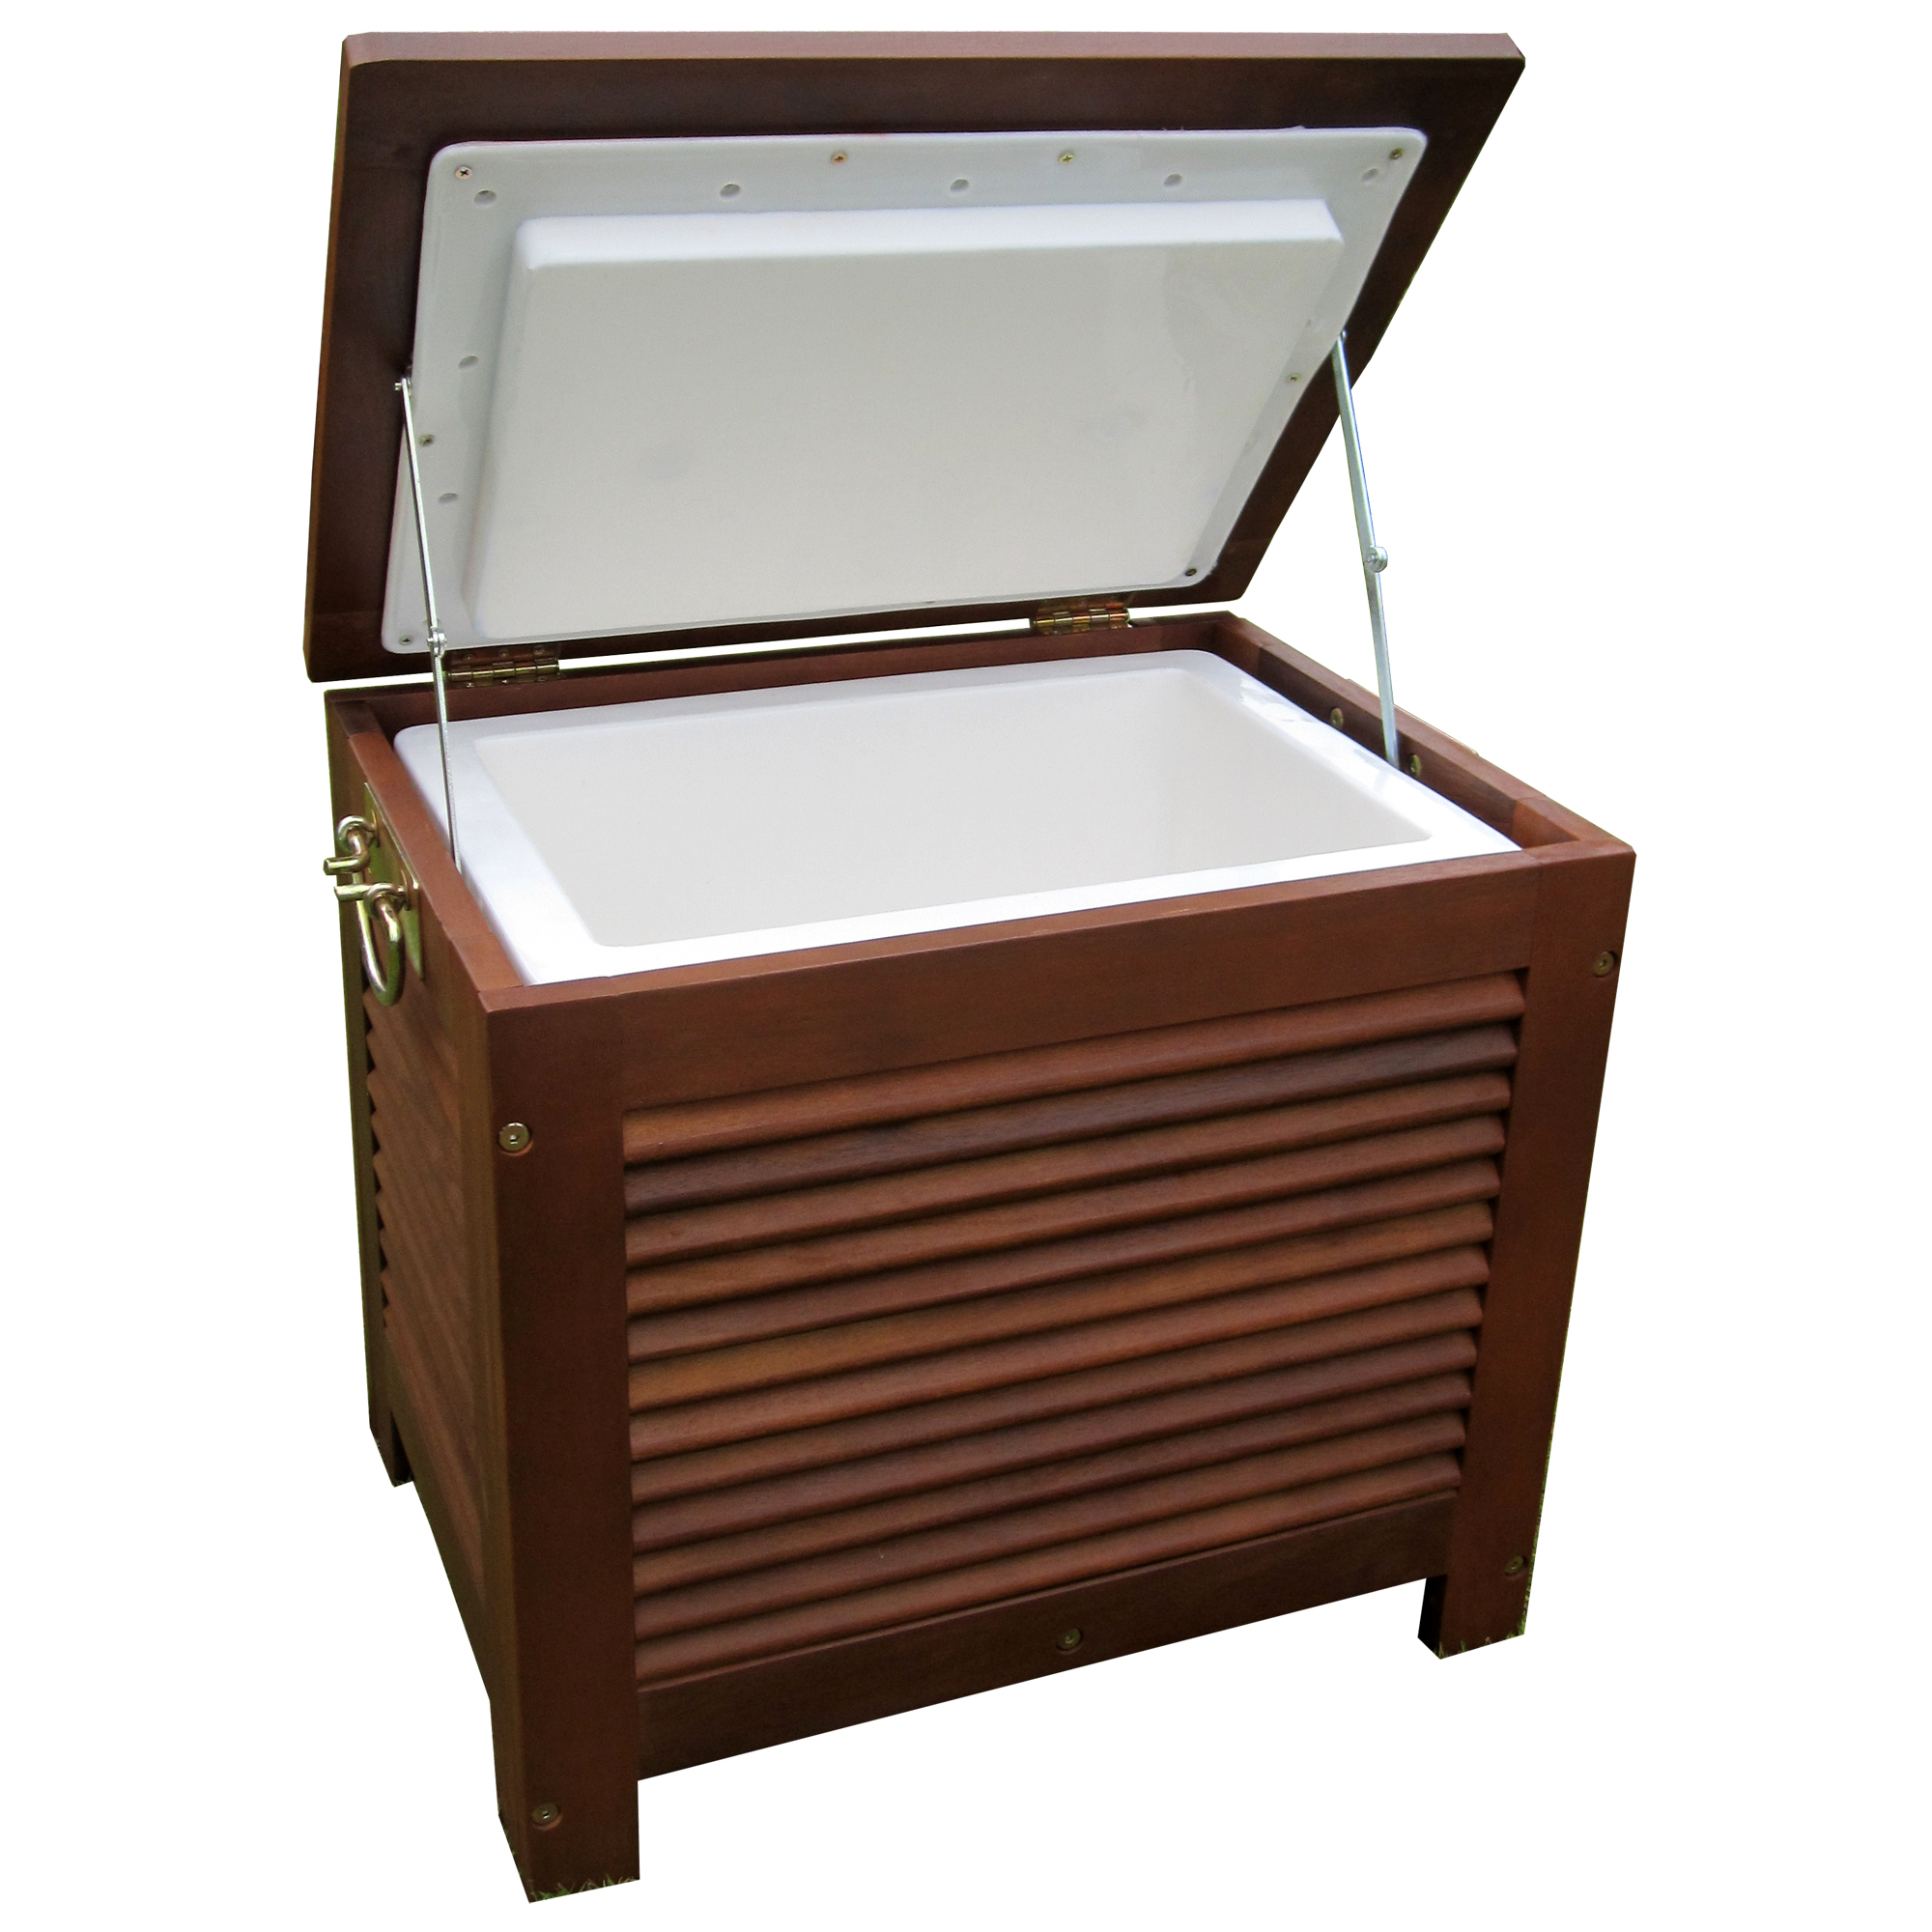 Merry Products, Wooden Patio Cooler, Model MPG-PC01